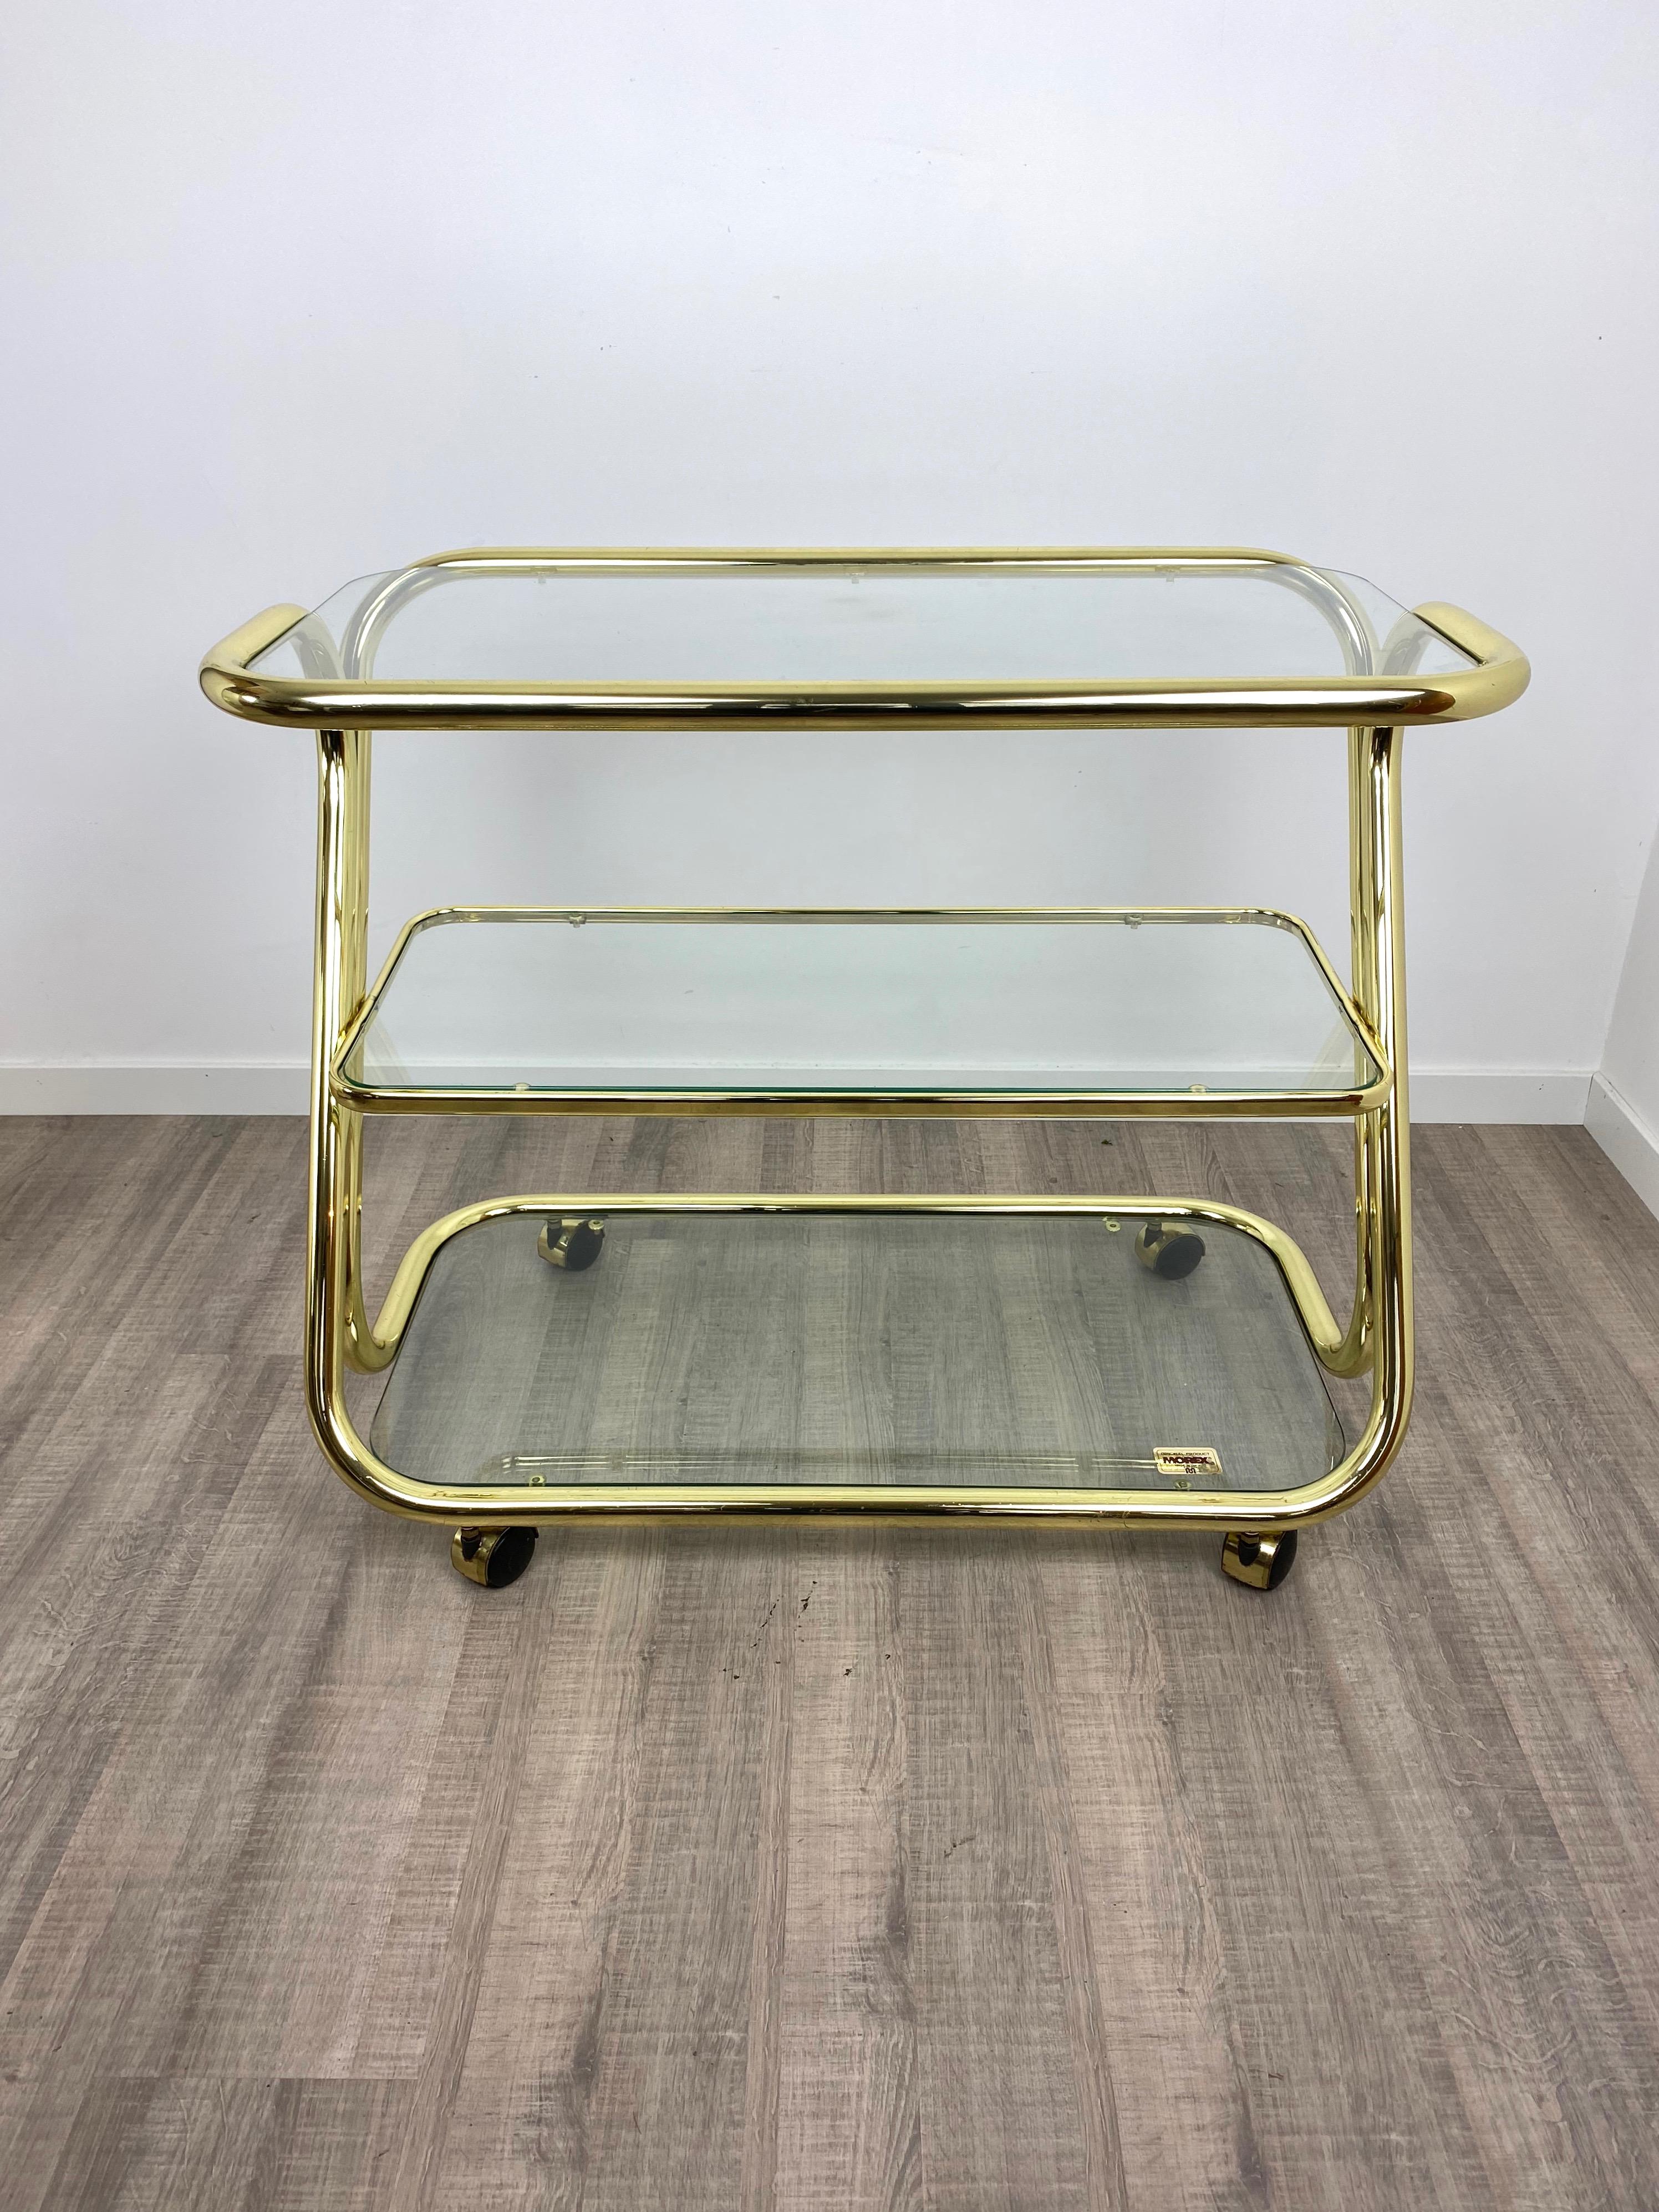 Italian Serving Cart Trolley in Glass and Golden Metal by Morex, Italy, 1980s For Sale